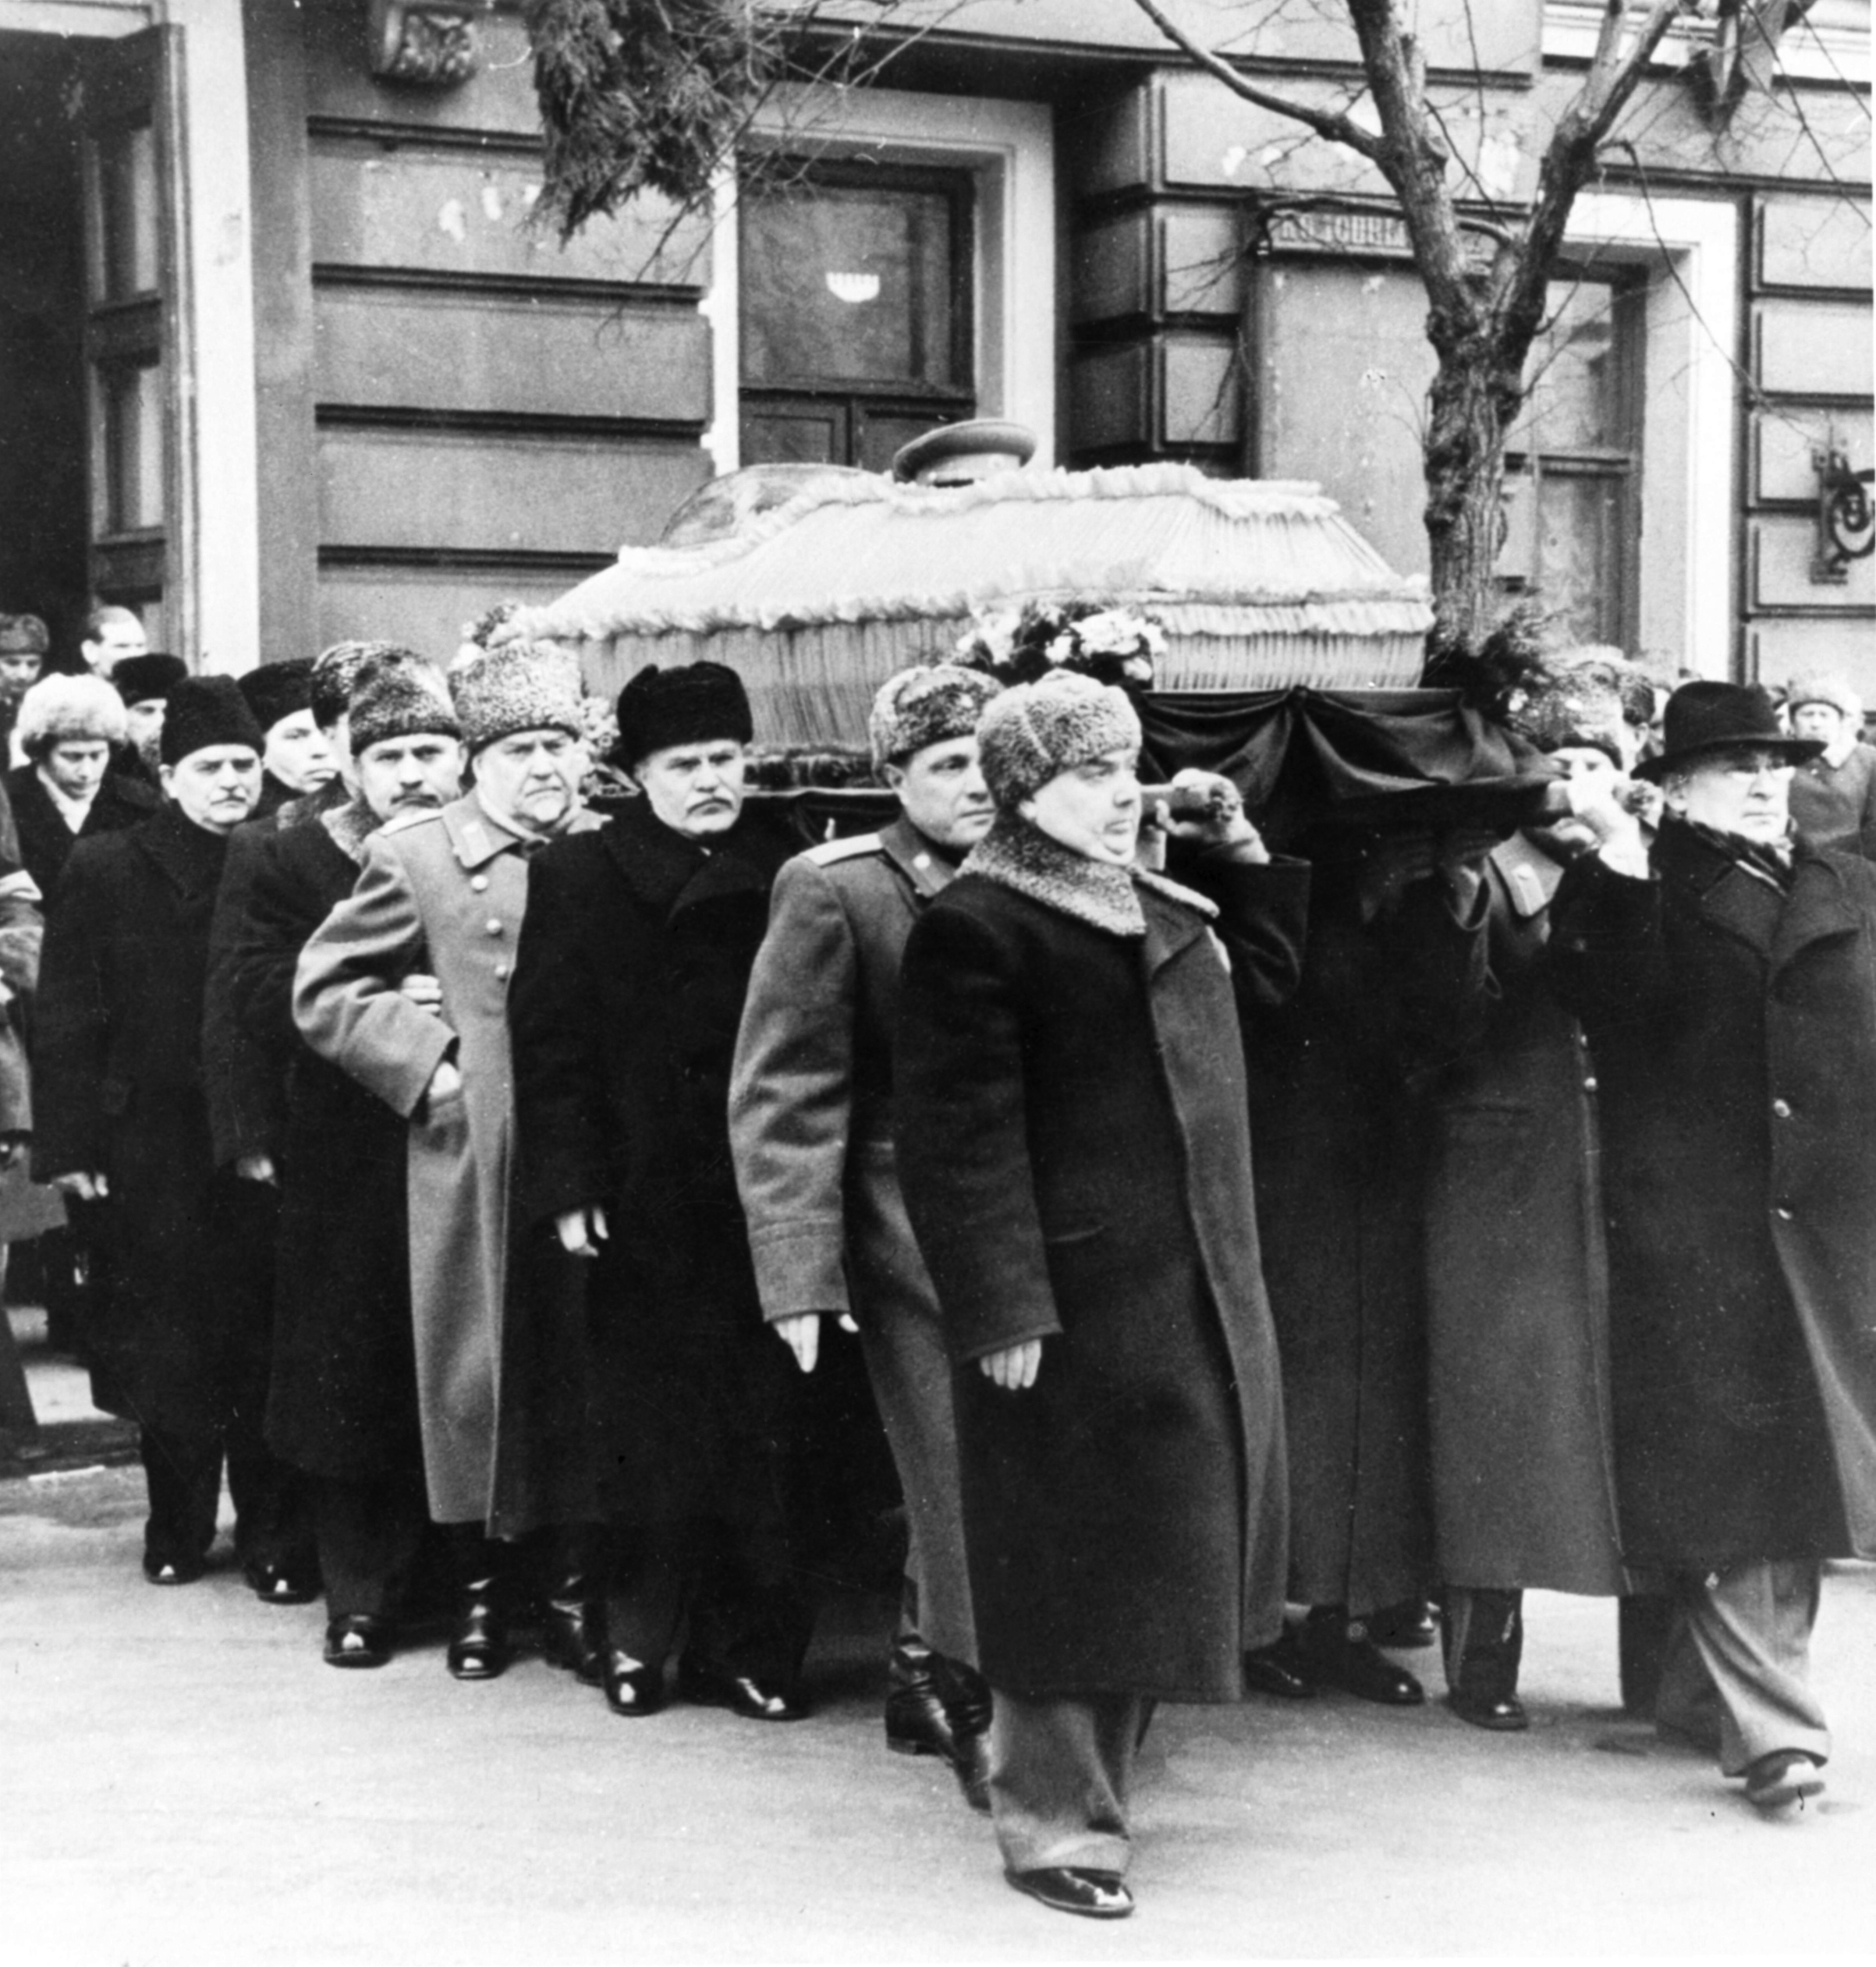 Stalin's coffin is  carried in Moscow, on March 9, 1953. Right to left: L.P. Beria (far right), Premier G.M. Malenkov, General Vassily Stalin, V.M. Molotov, Marshal N. Bulganin, L. Kaganovich, N. Shvernik. (Sovfoto/UIG / Getty Images)